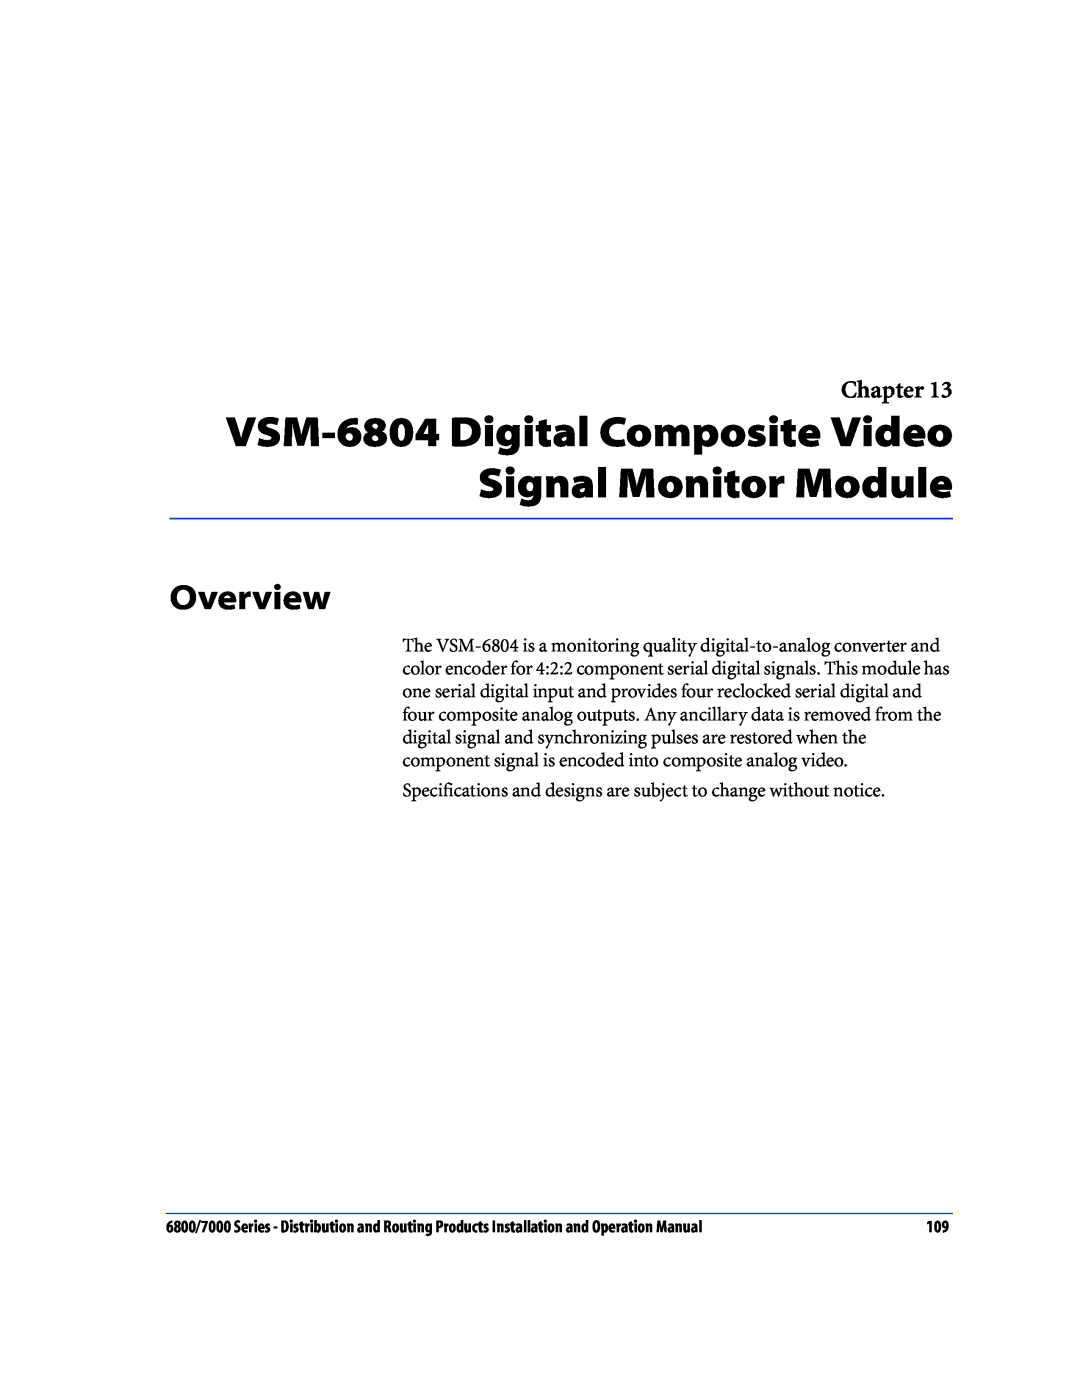 Nokia 6800 Series, 7000 Series operation manual VSM-6804 Digital Composite Video Signal Monitor Module, Overview, Chapter 